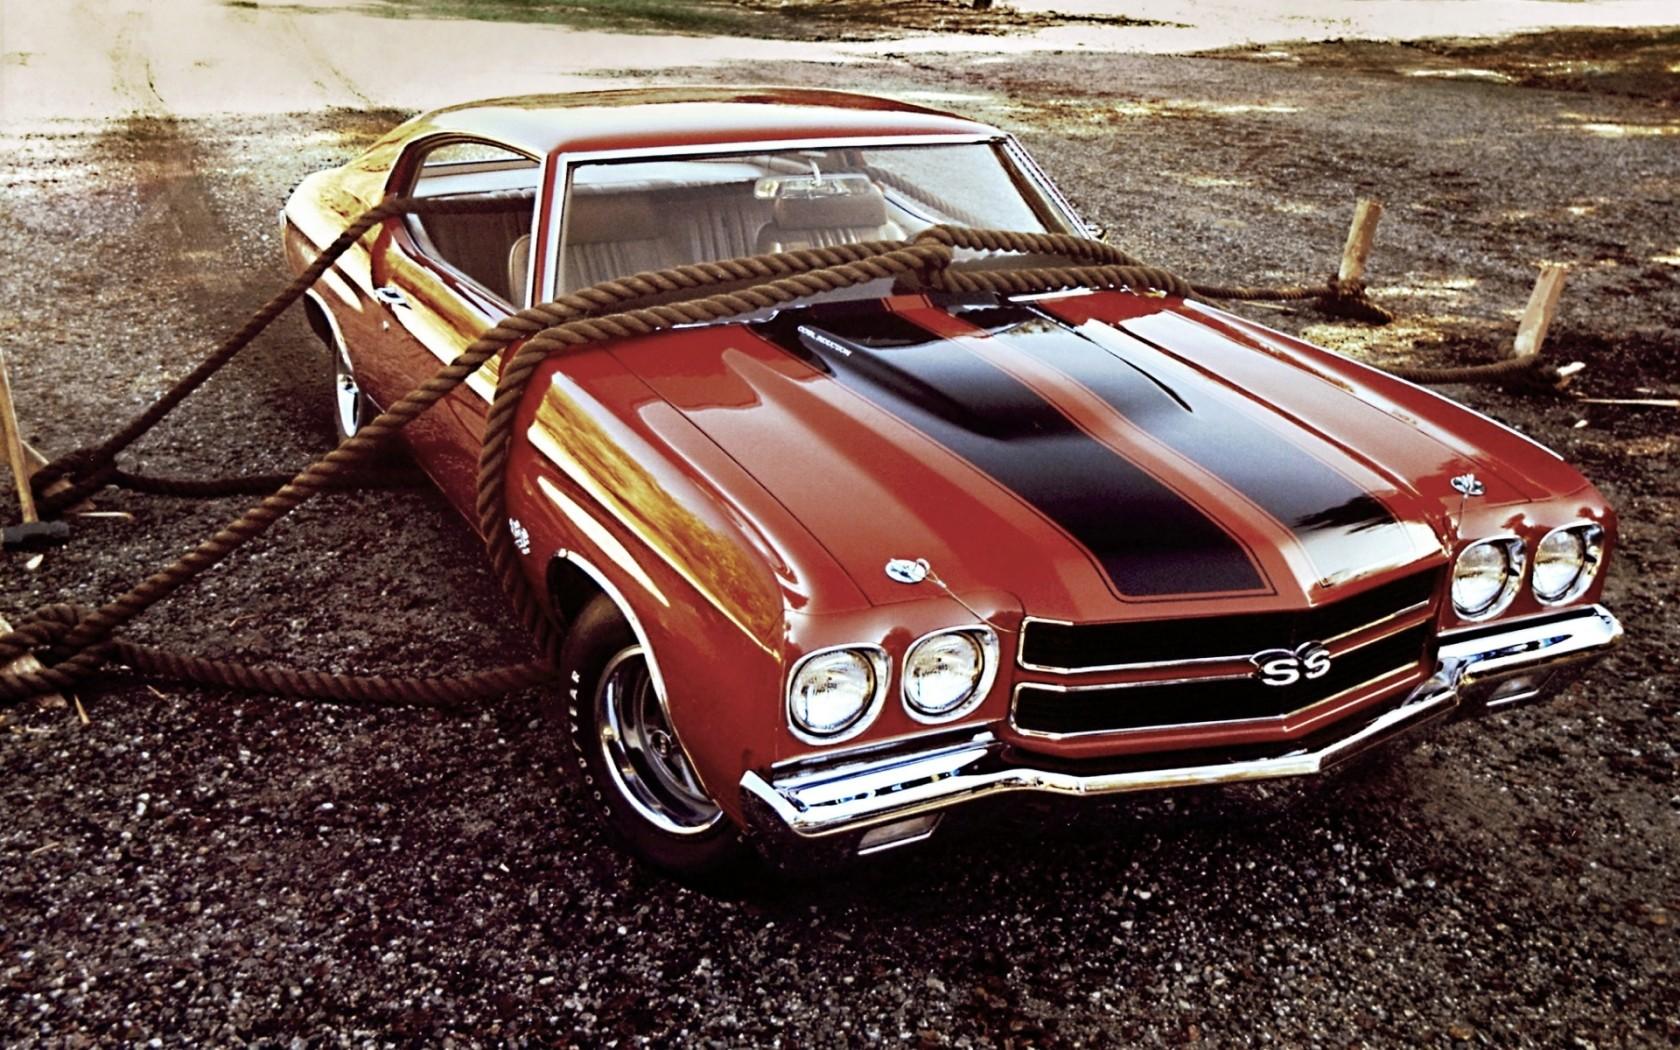 Chevrolet Chevelle SS Wallpapers HD Download 1680x1050